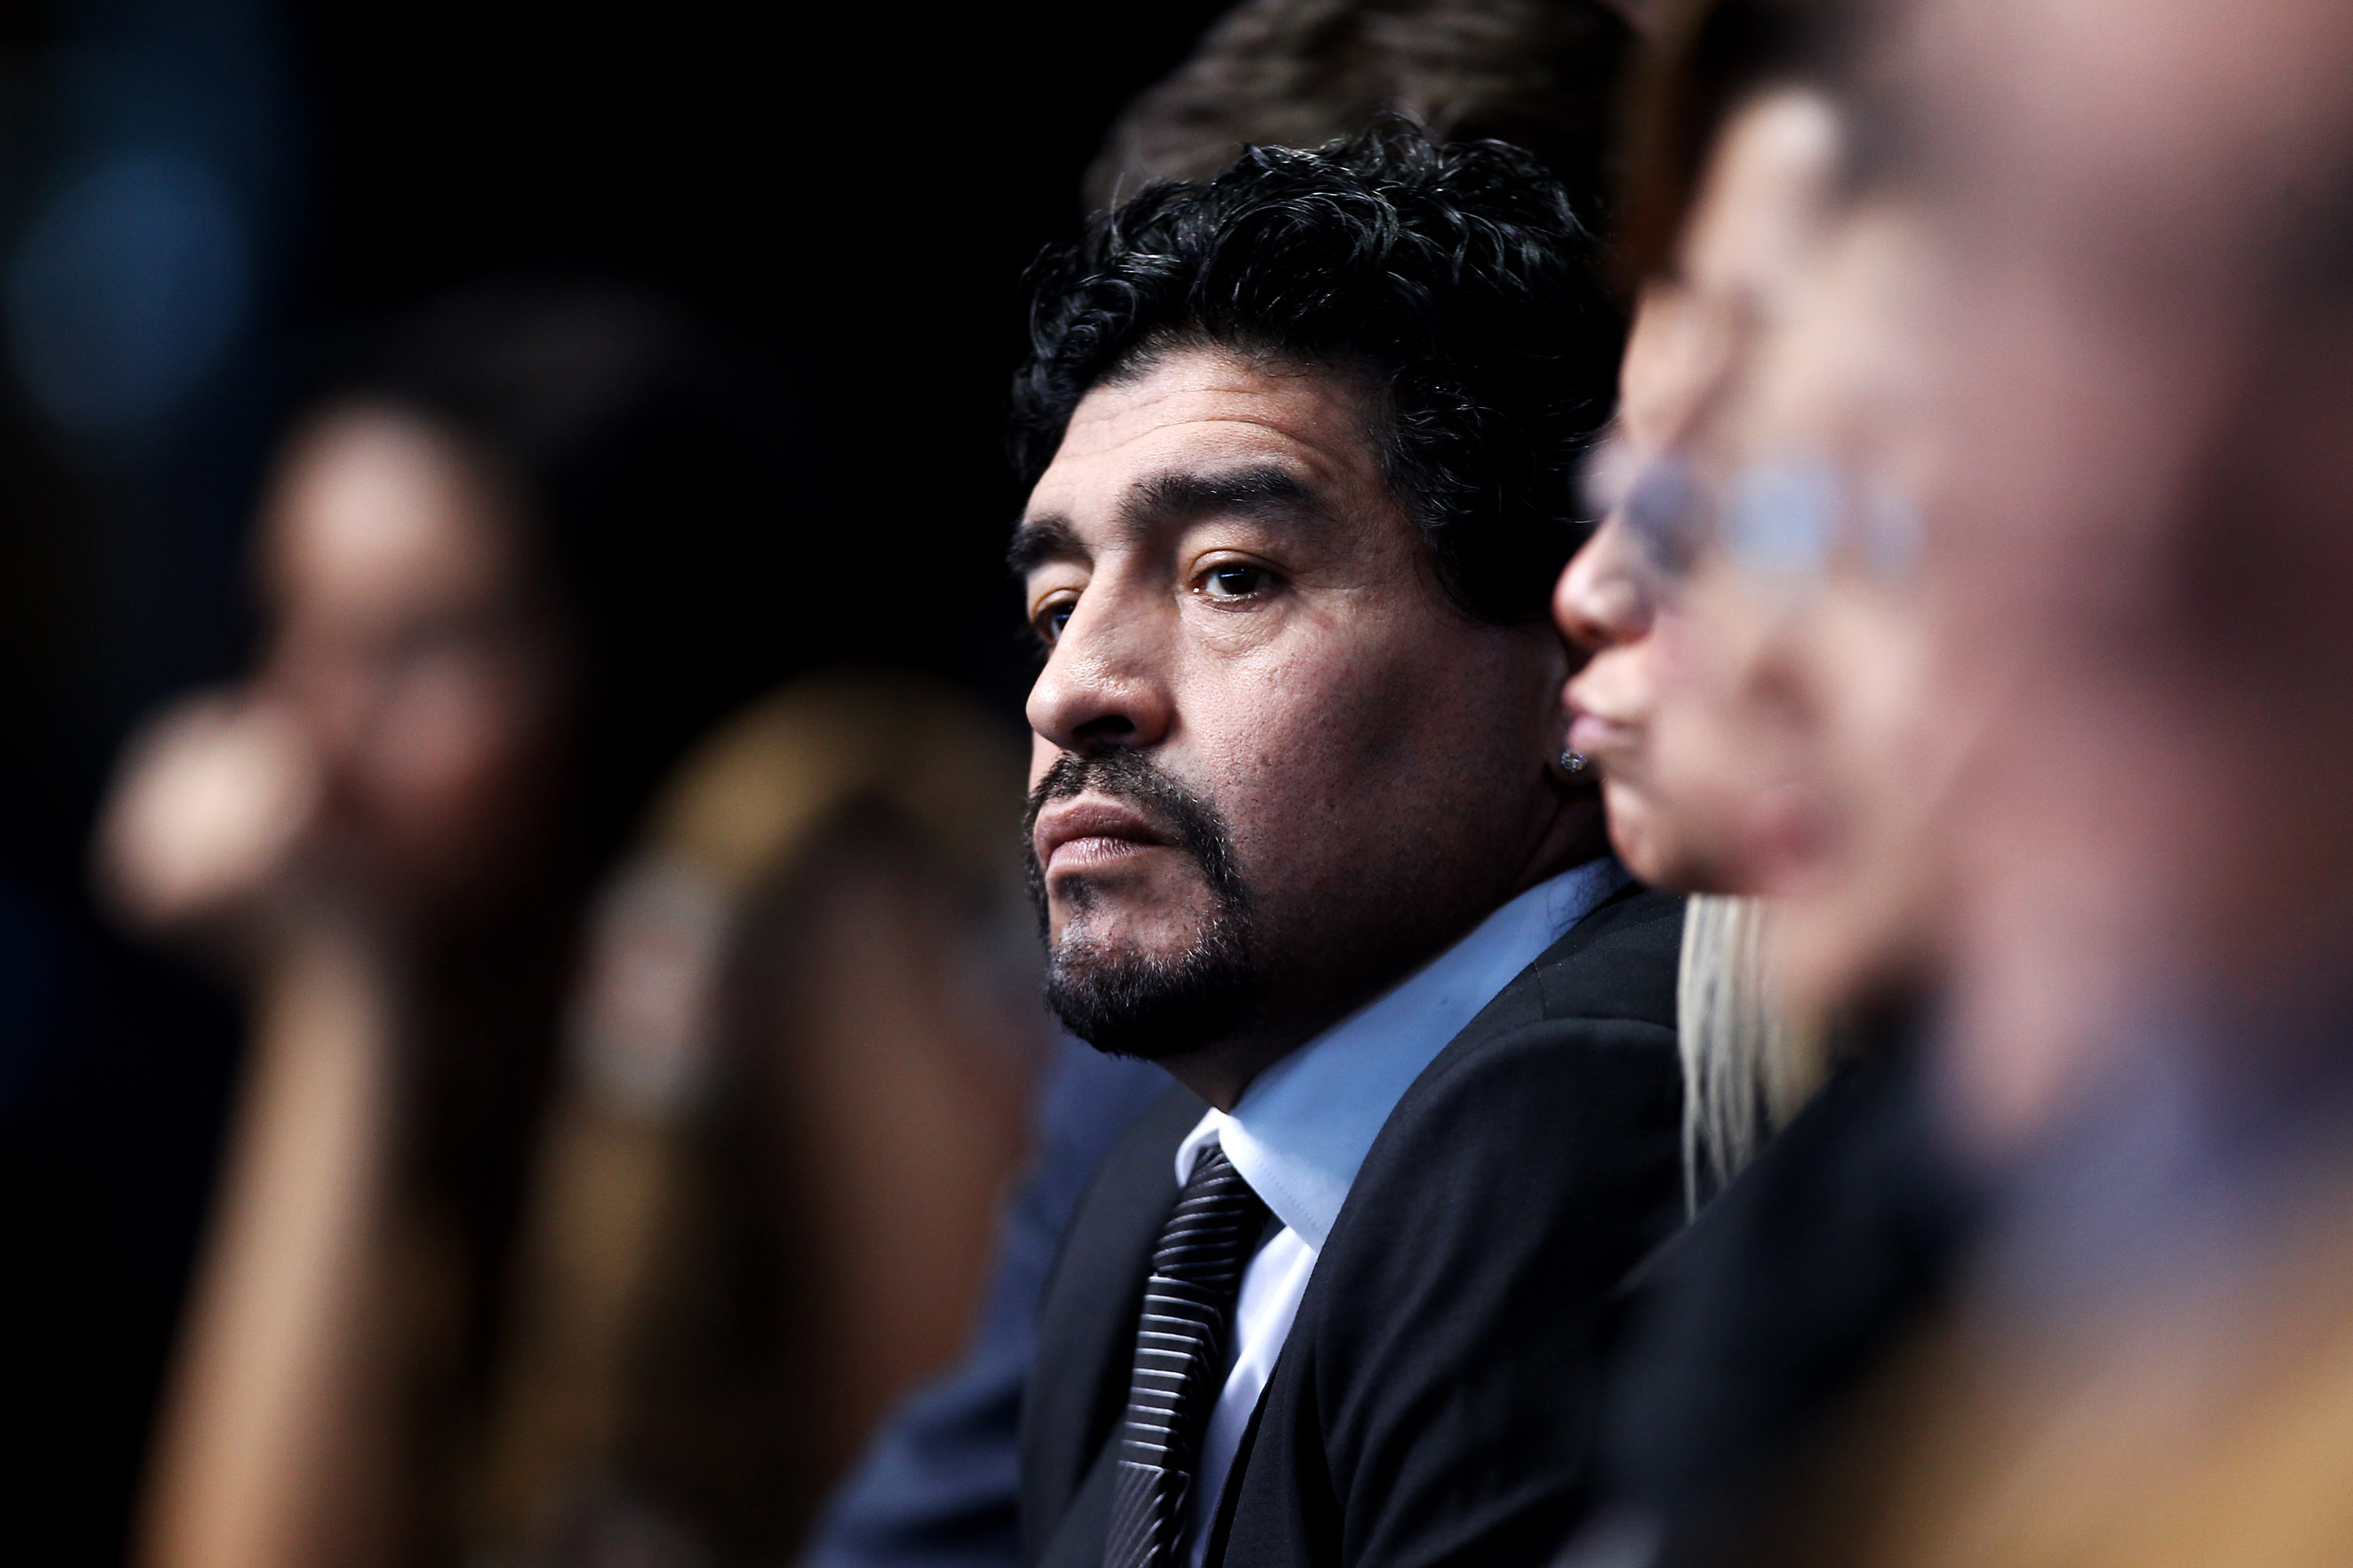 LONDON, ENGLAND - NOVEMBER 23:  Former Argentinian footballer Diego Maradona attends the Roger Federer / Andy Murray Men's singles match during the ATP World Tour Finals at O2 Arena on November 23, 2010 in London, England.  (Photo by Matthew Lewis/Getty I